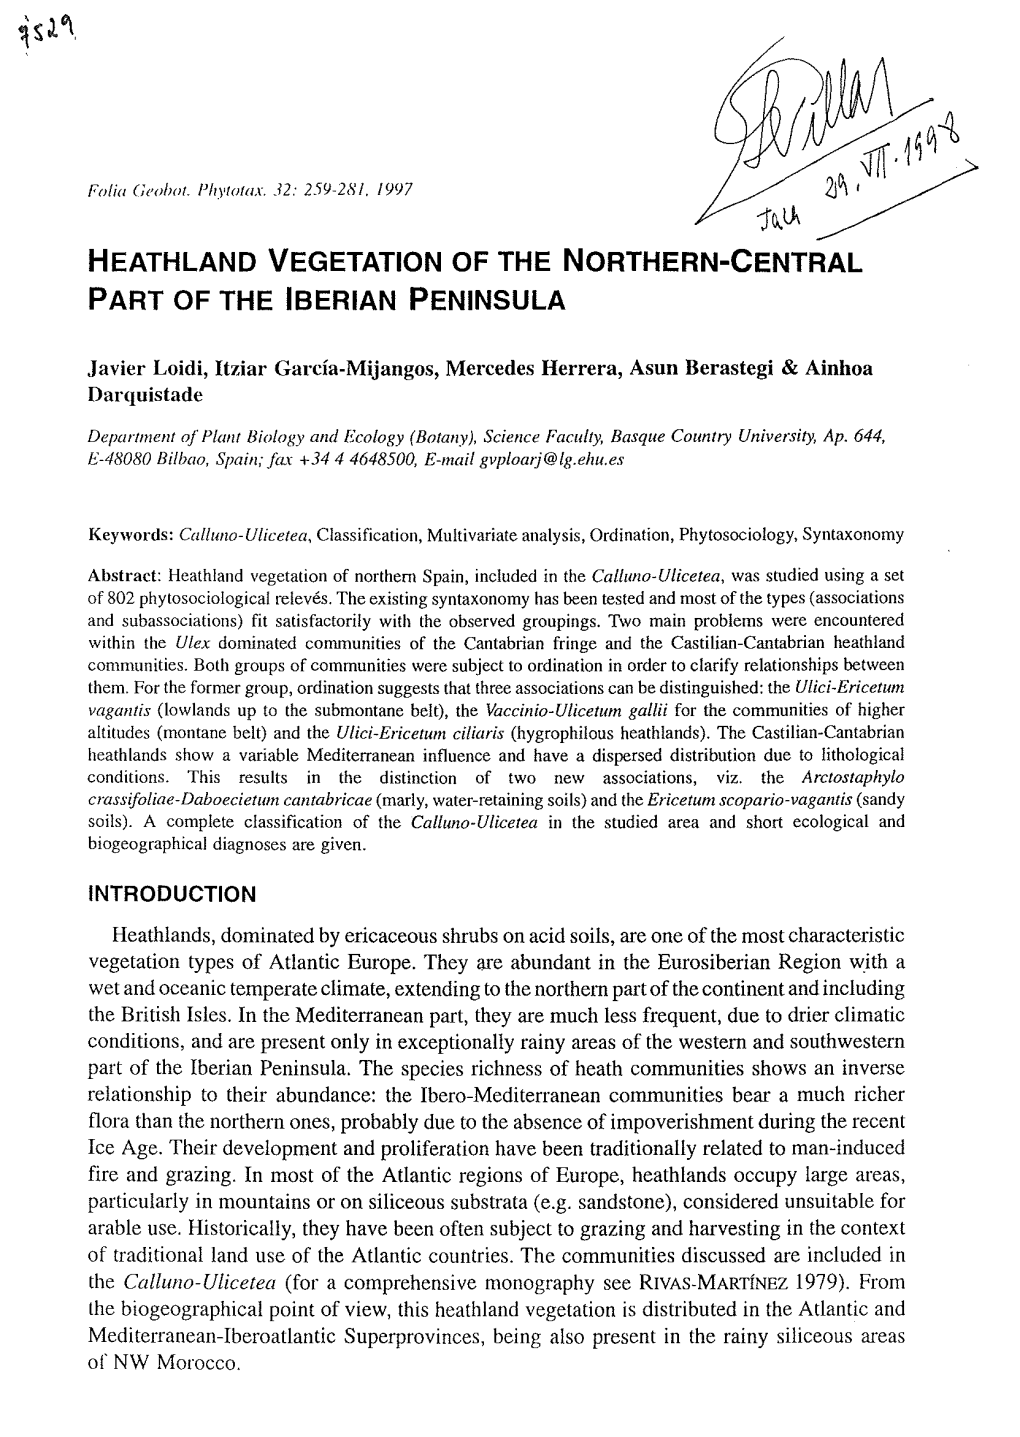 Heathland Vegetation of the Northern-Central Part of the Iberian Peninsula